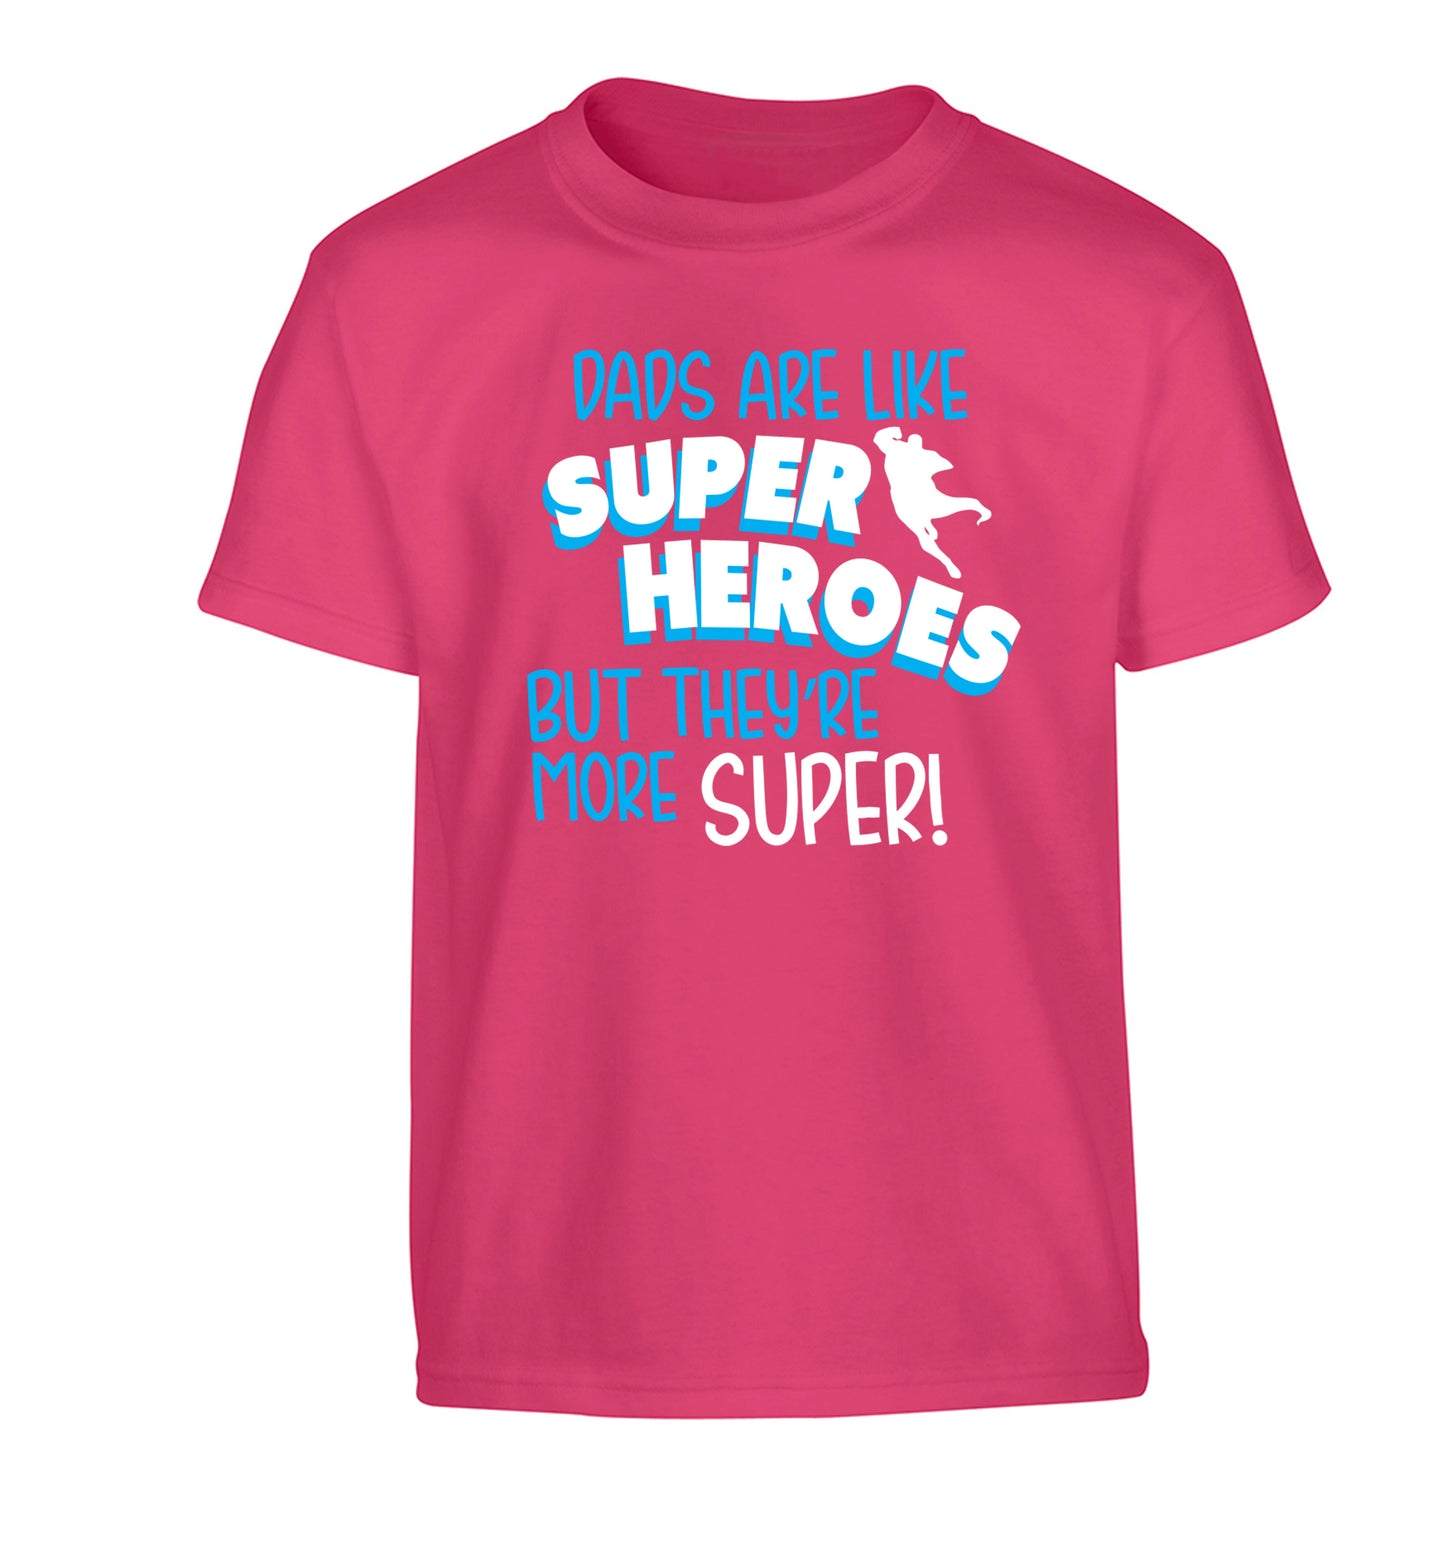 Dads are like superheros but they're more super Children's pink Tshirt 12-13 Years